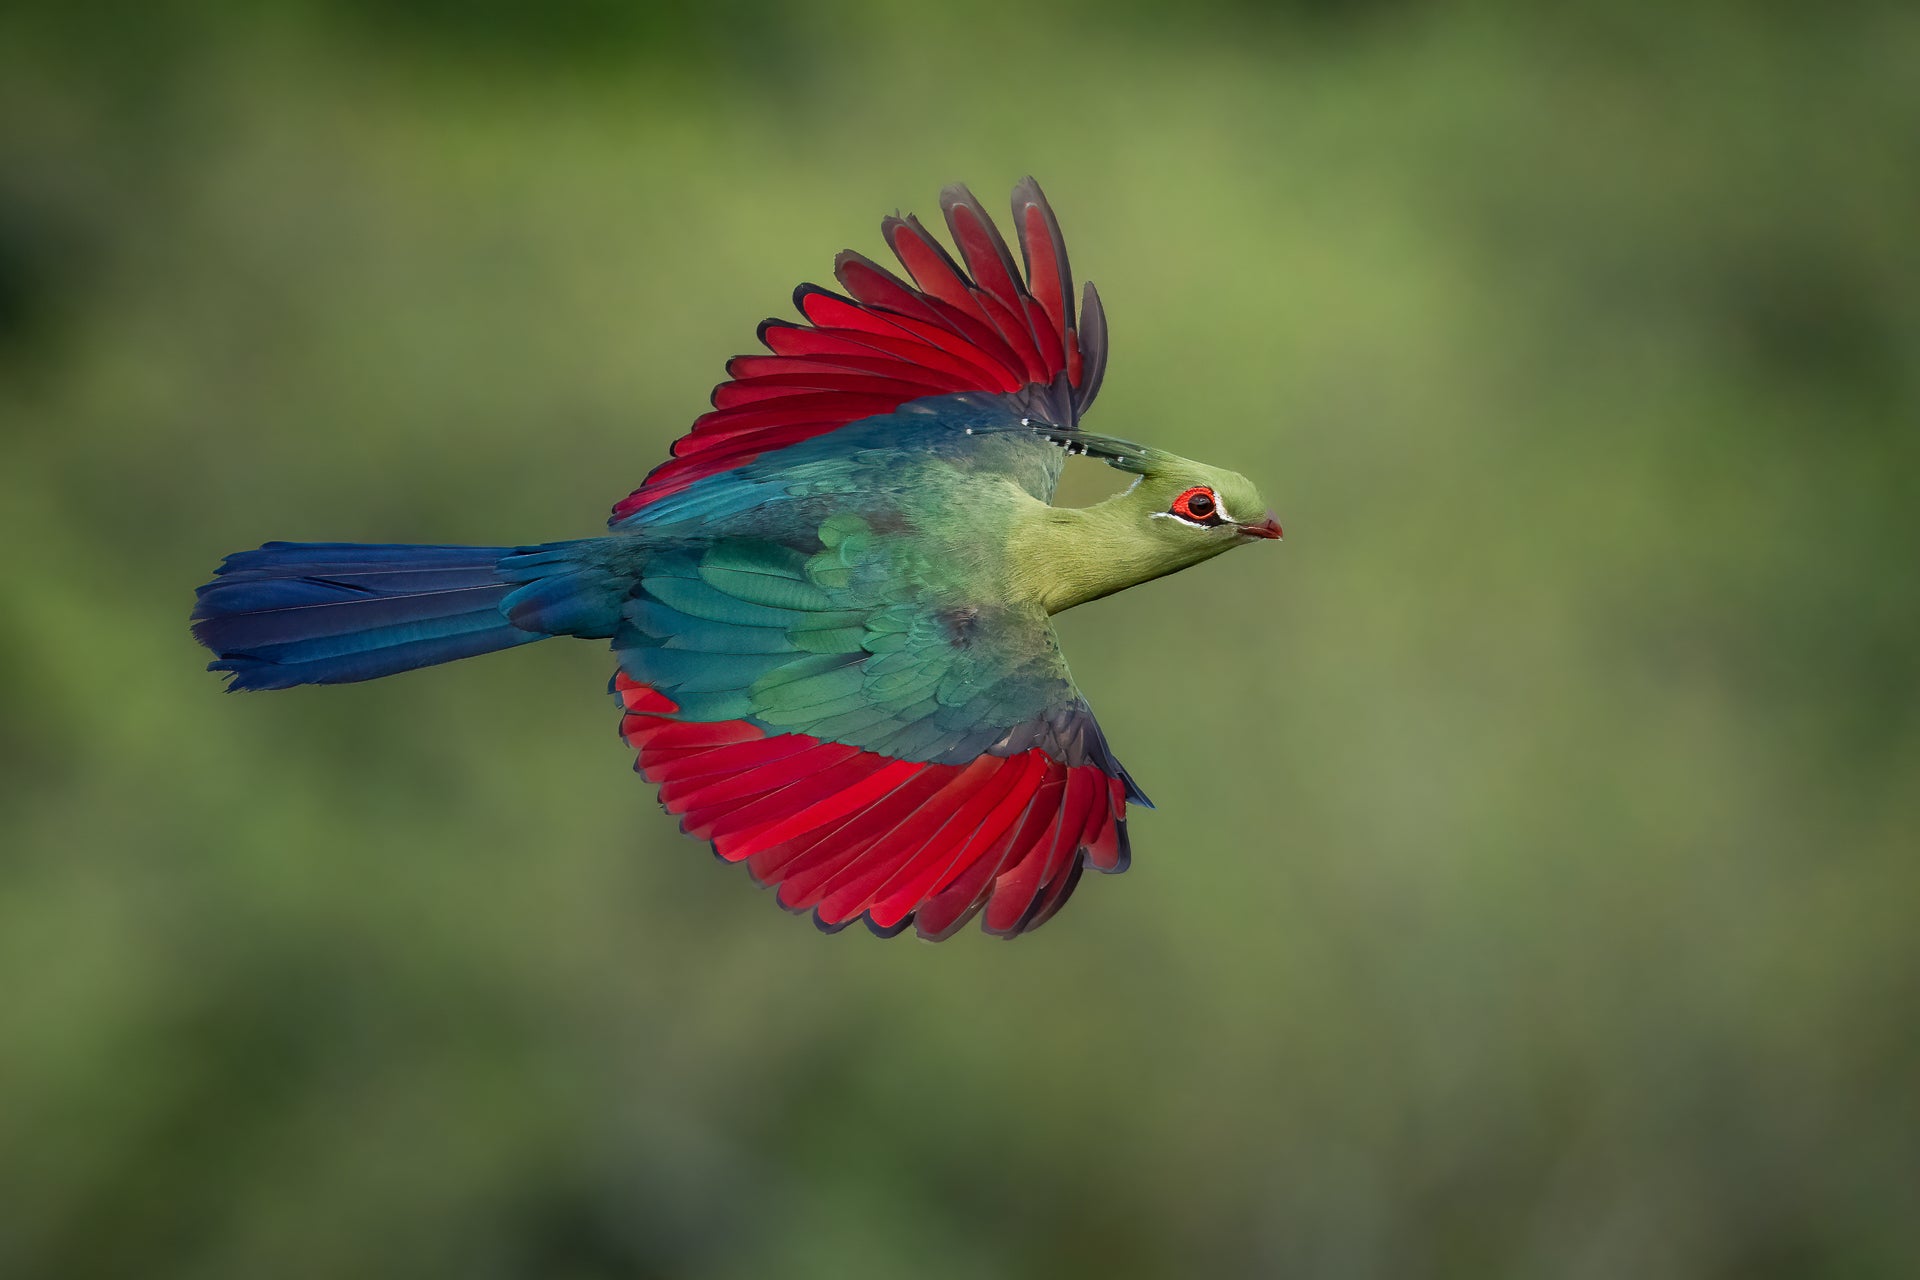 A Schalow's turaco flying. (Photo: Aaron Baggenstos)